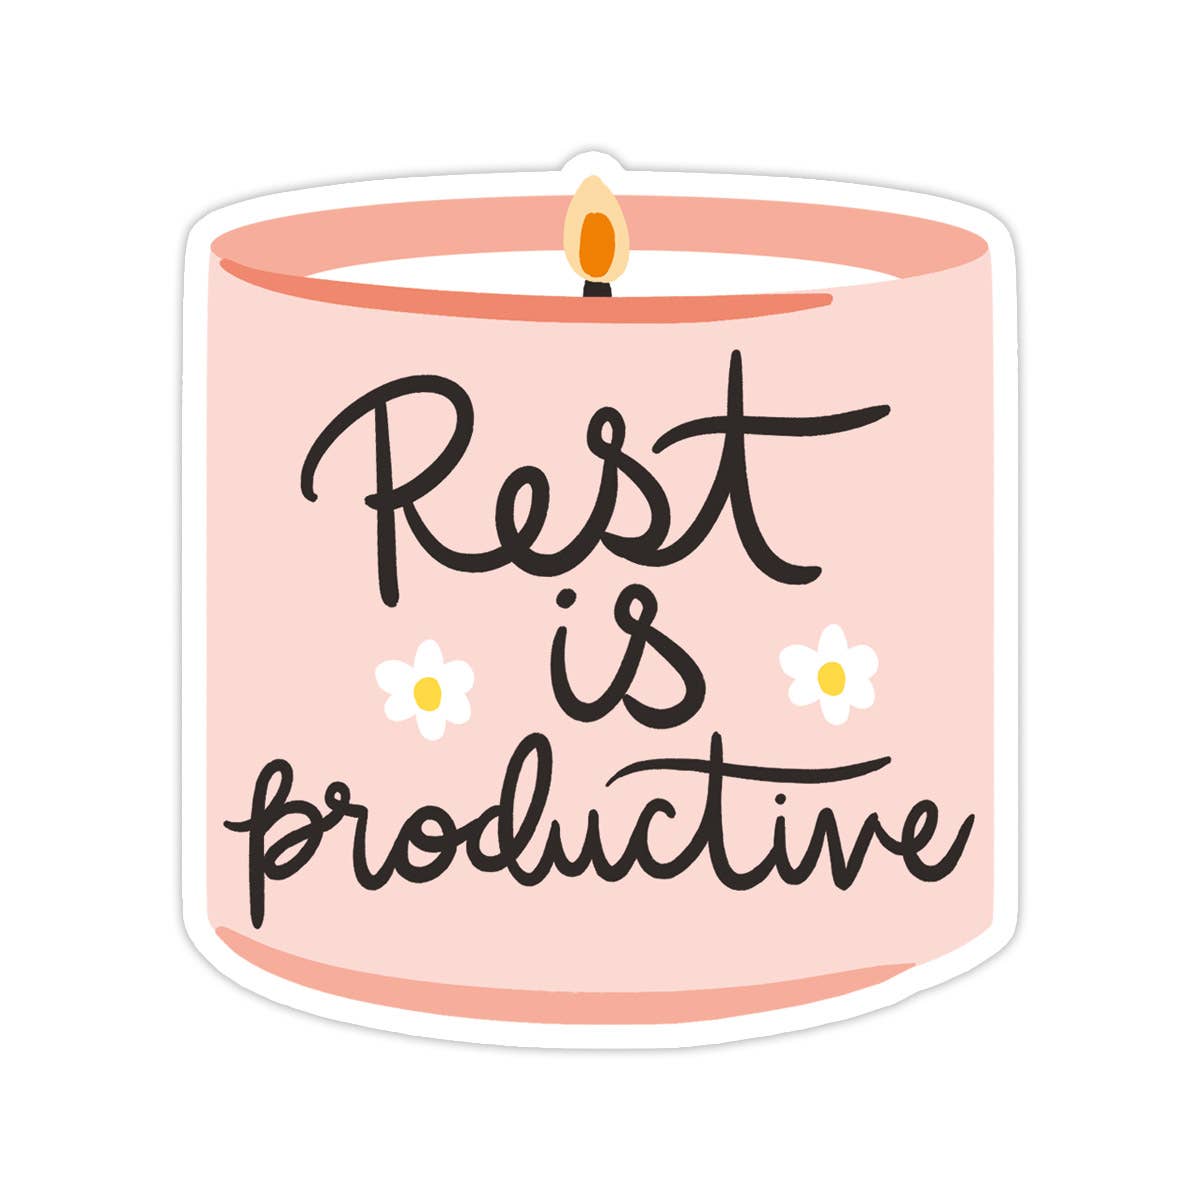 Rest is Productive Sticker - Spiral Circle